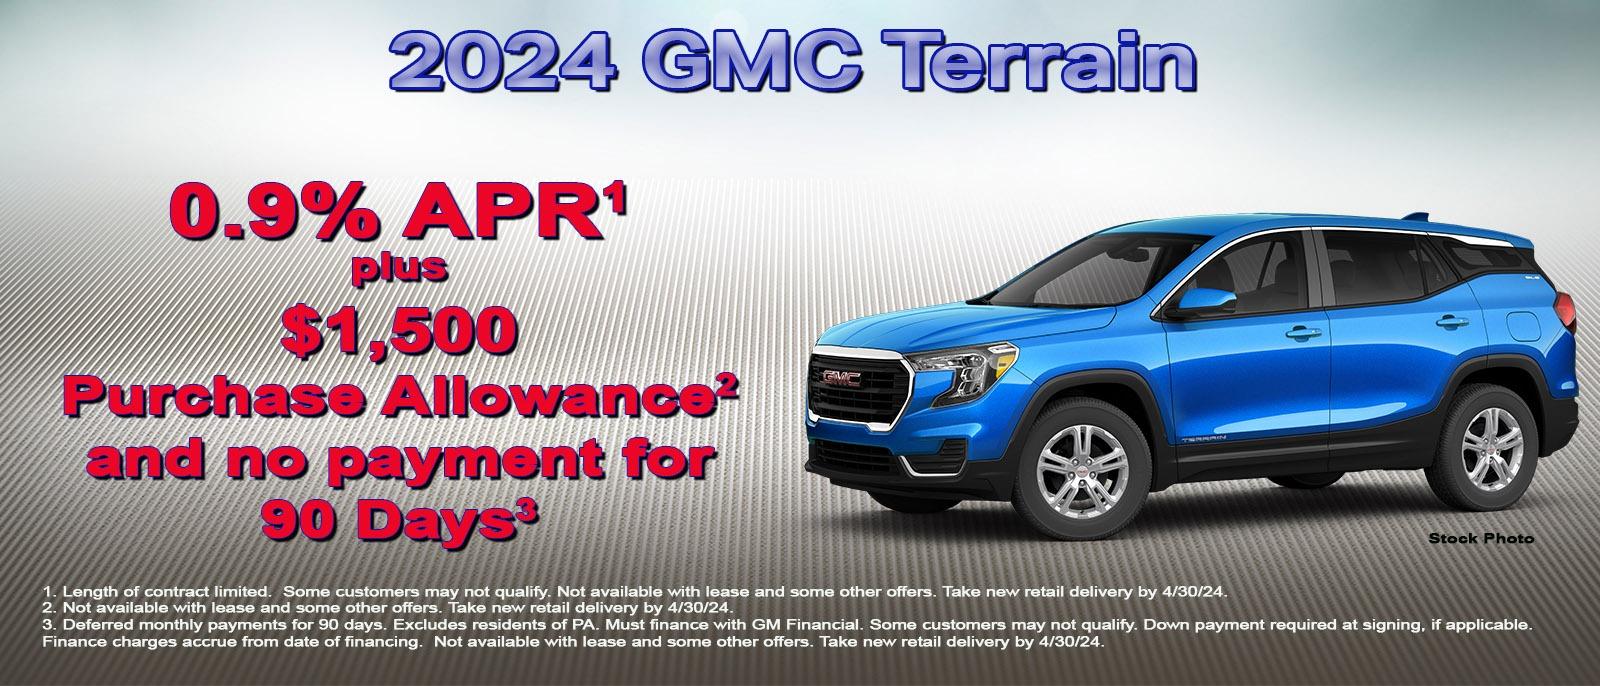 No payments for 90 days on your new GMC Terrain